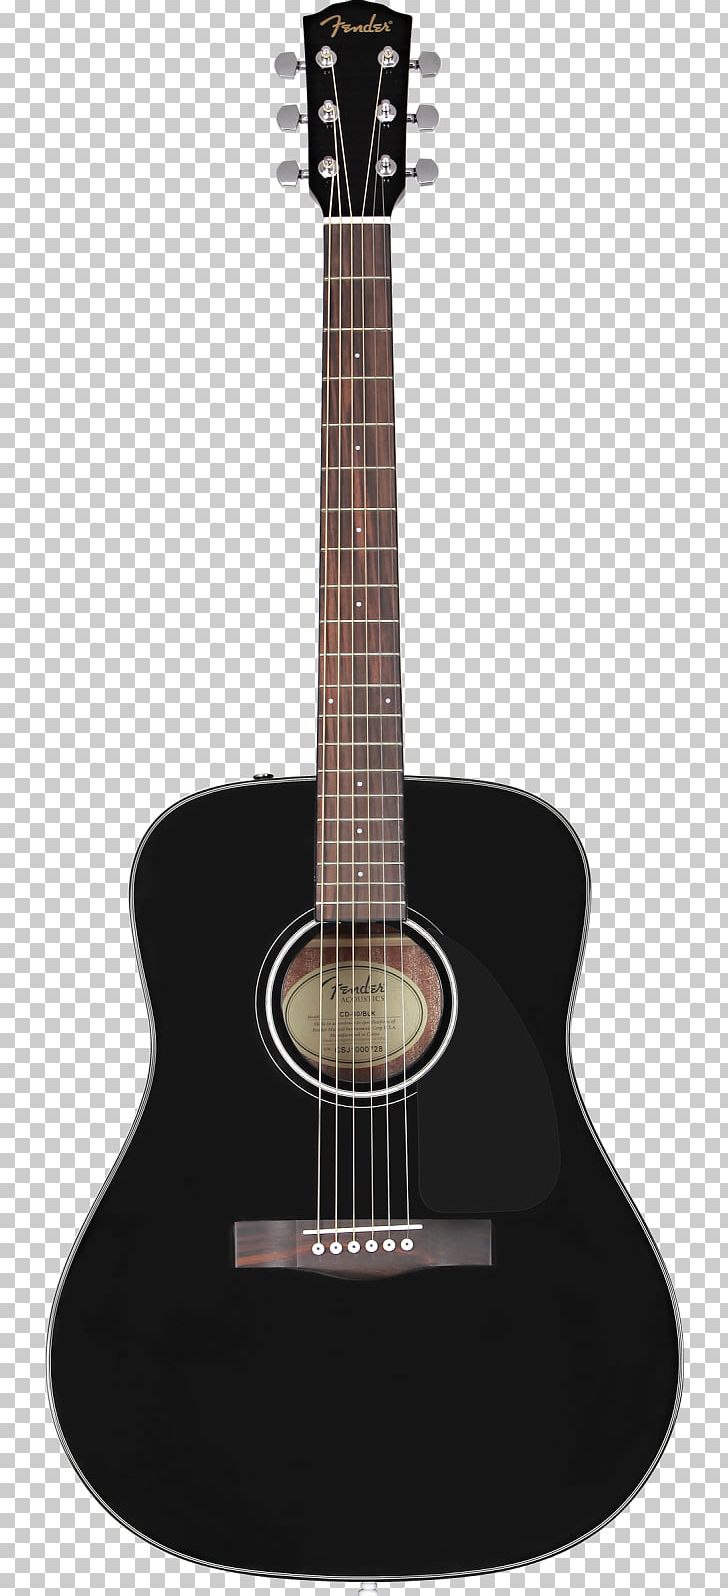 Dreadnought Steel-string Acoustic Guitar Fender Musical Instruments Corporation Acoustic-electric Guitar PNG, Clipart, Acoustic Electric Guitar, Cuatro, Cutaway, Fender Stratocaster, Guitar Free PNG Download